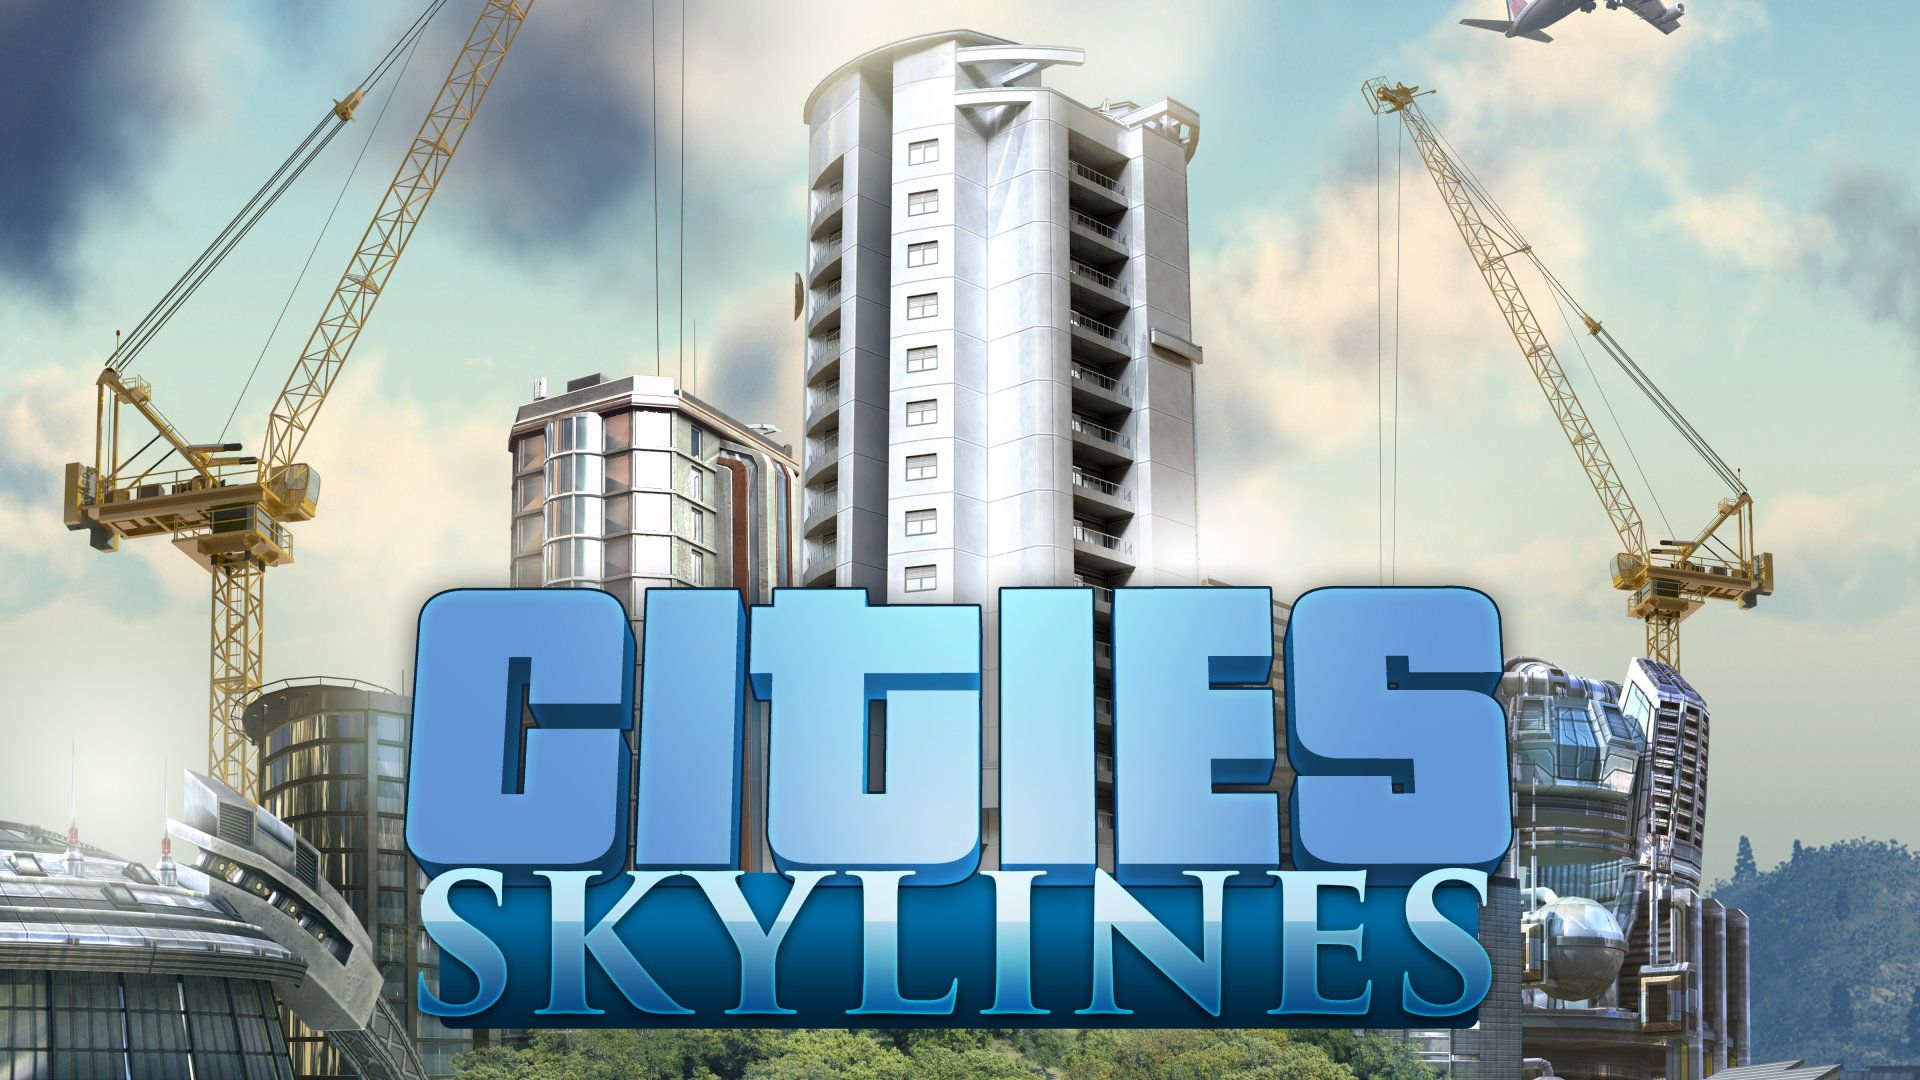 Cities: Skylines 2 Pre-order Guide: Release Date, Steam Price, Editions &  More